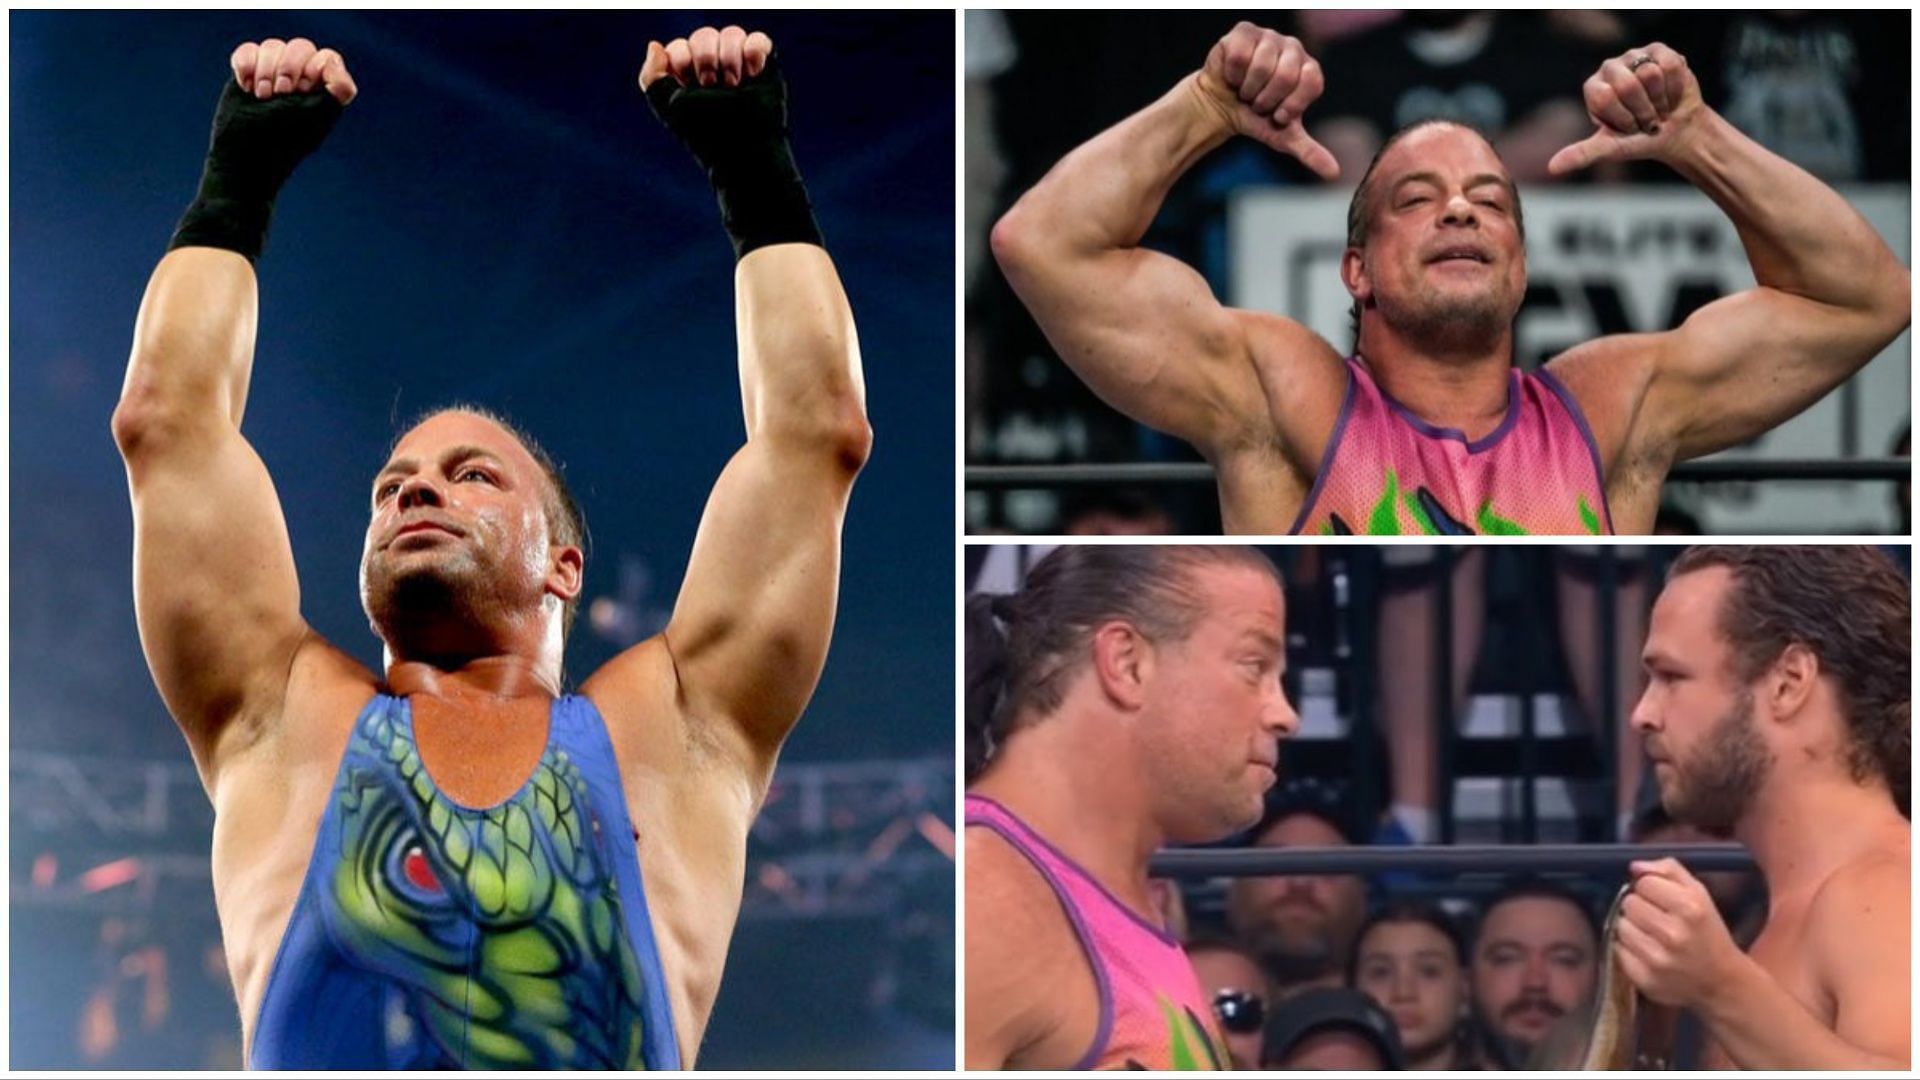 Hall of Famer Rob Van Dam (RVD) and one of AEW